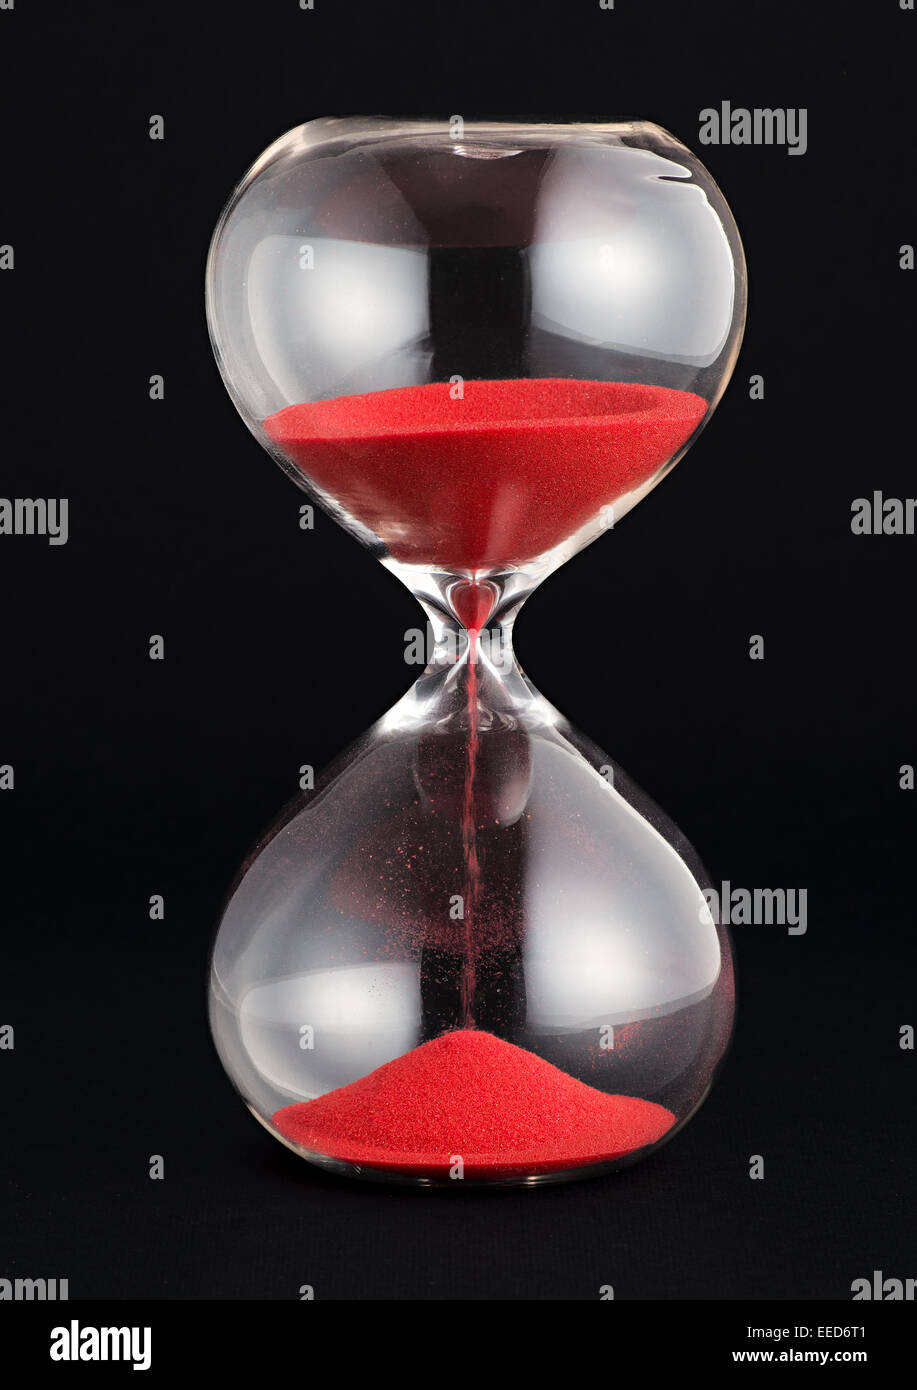 Hourglass with red sand running through the bulbs Stock Photo